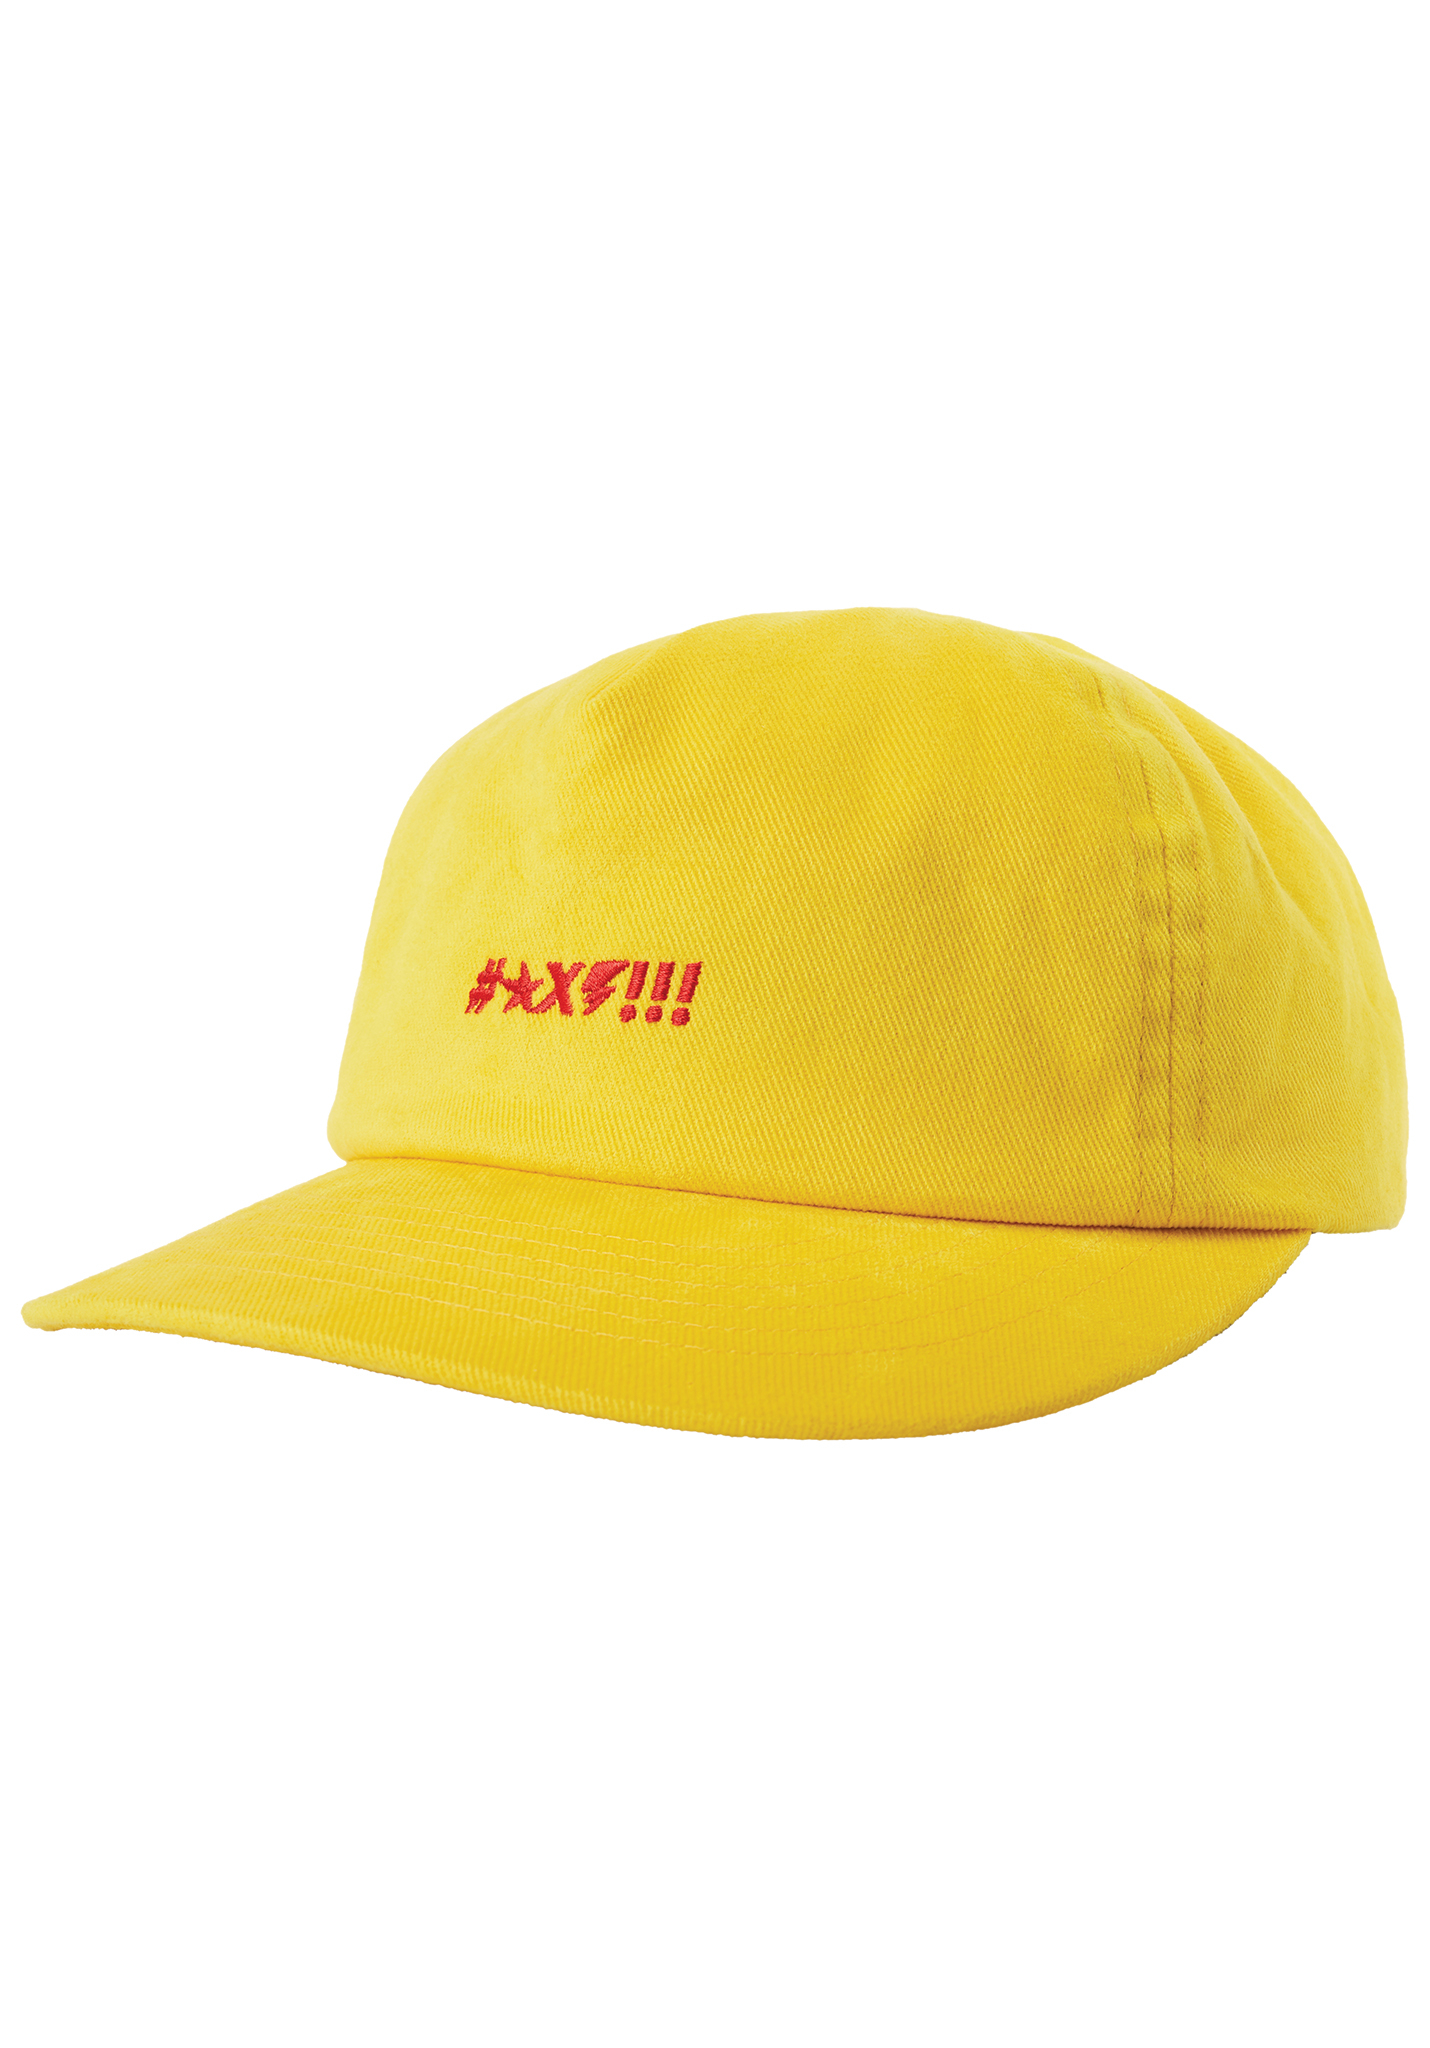 Brixton Shine LP Independent Caps yellow One Size